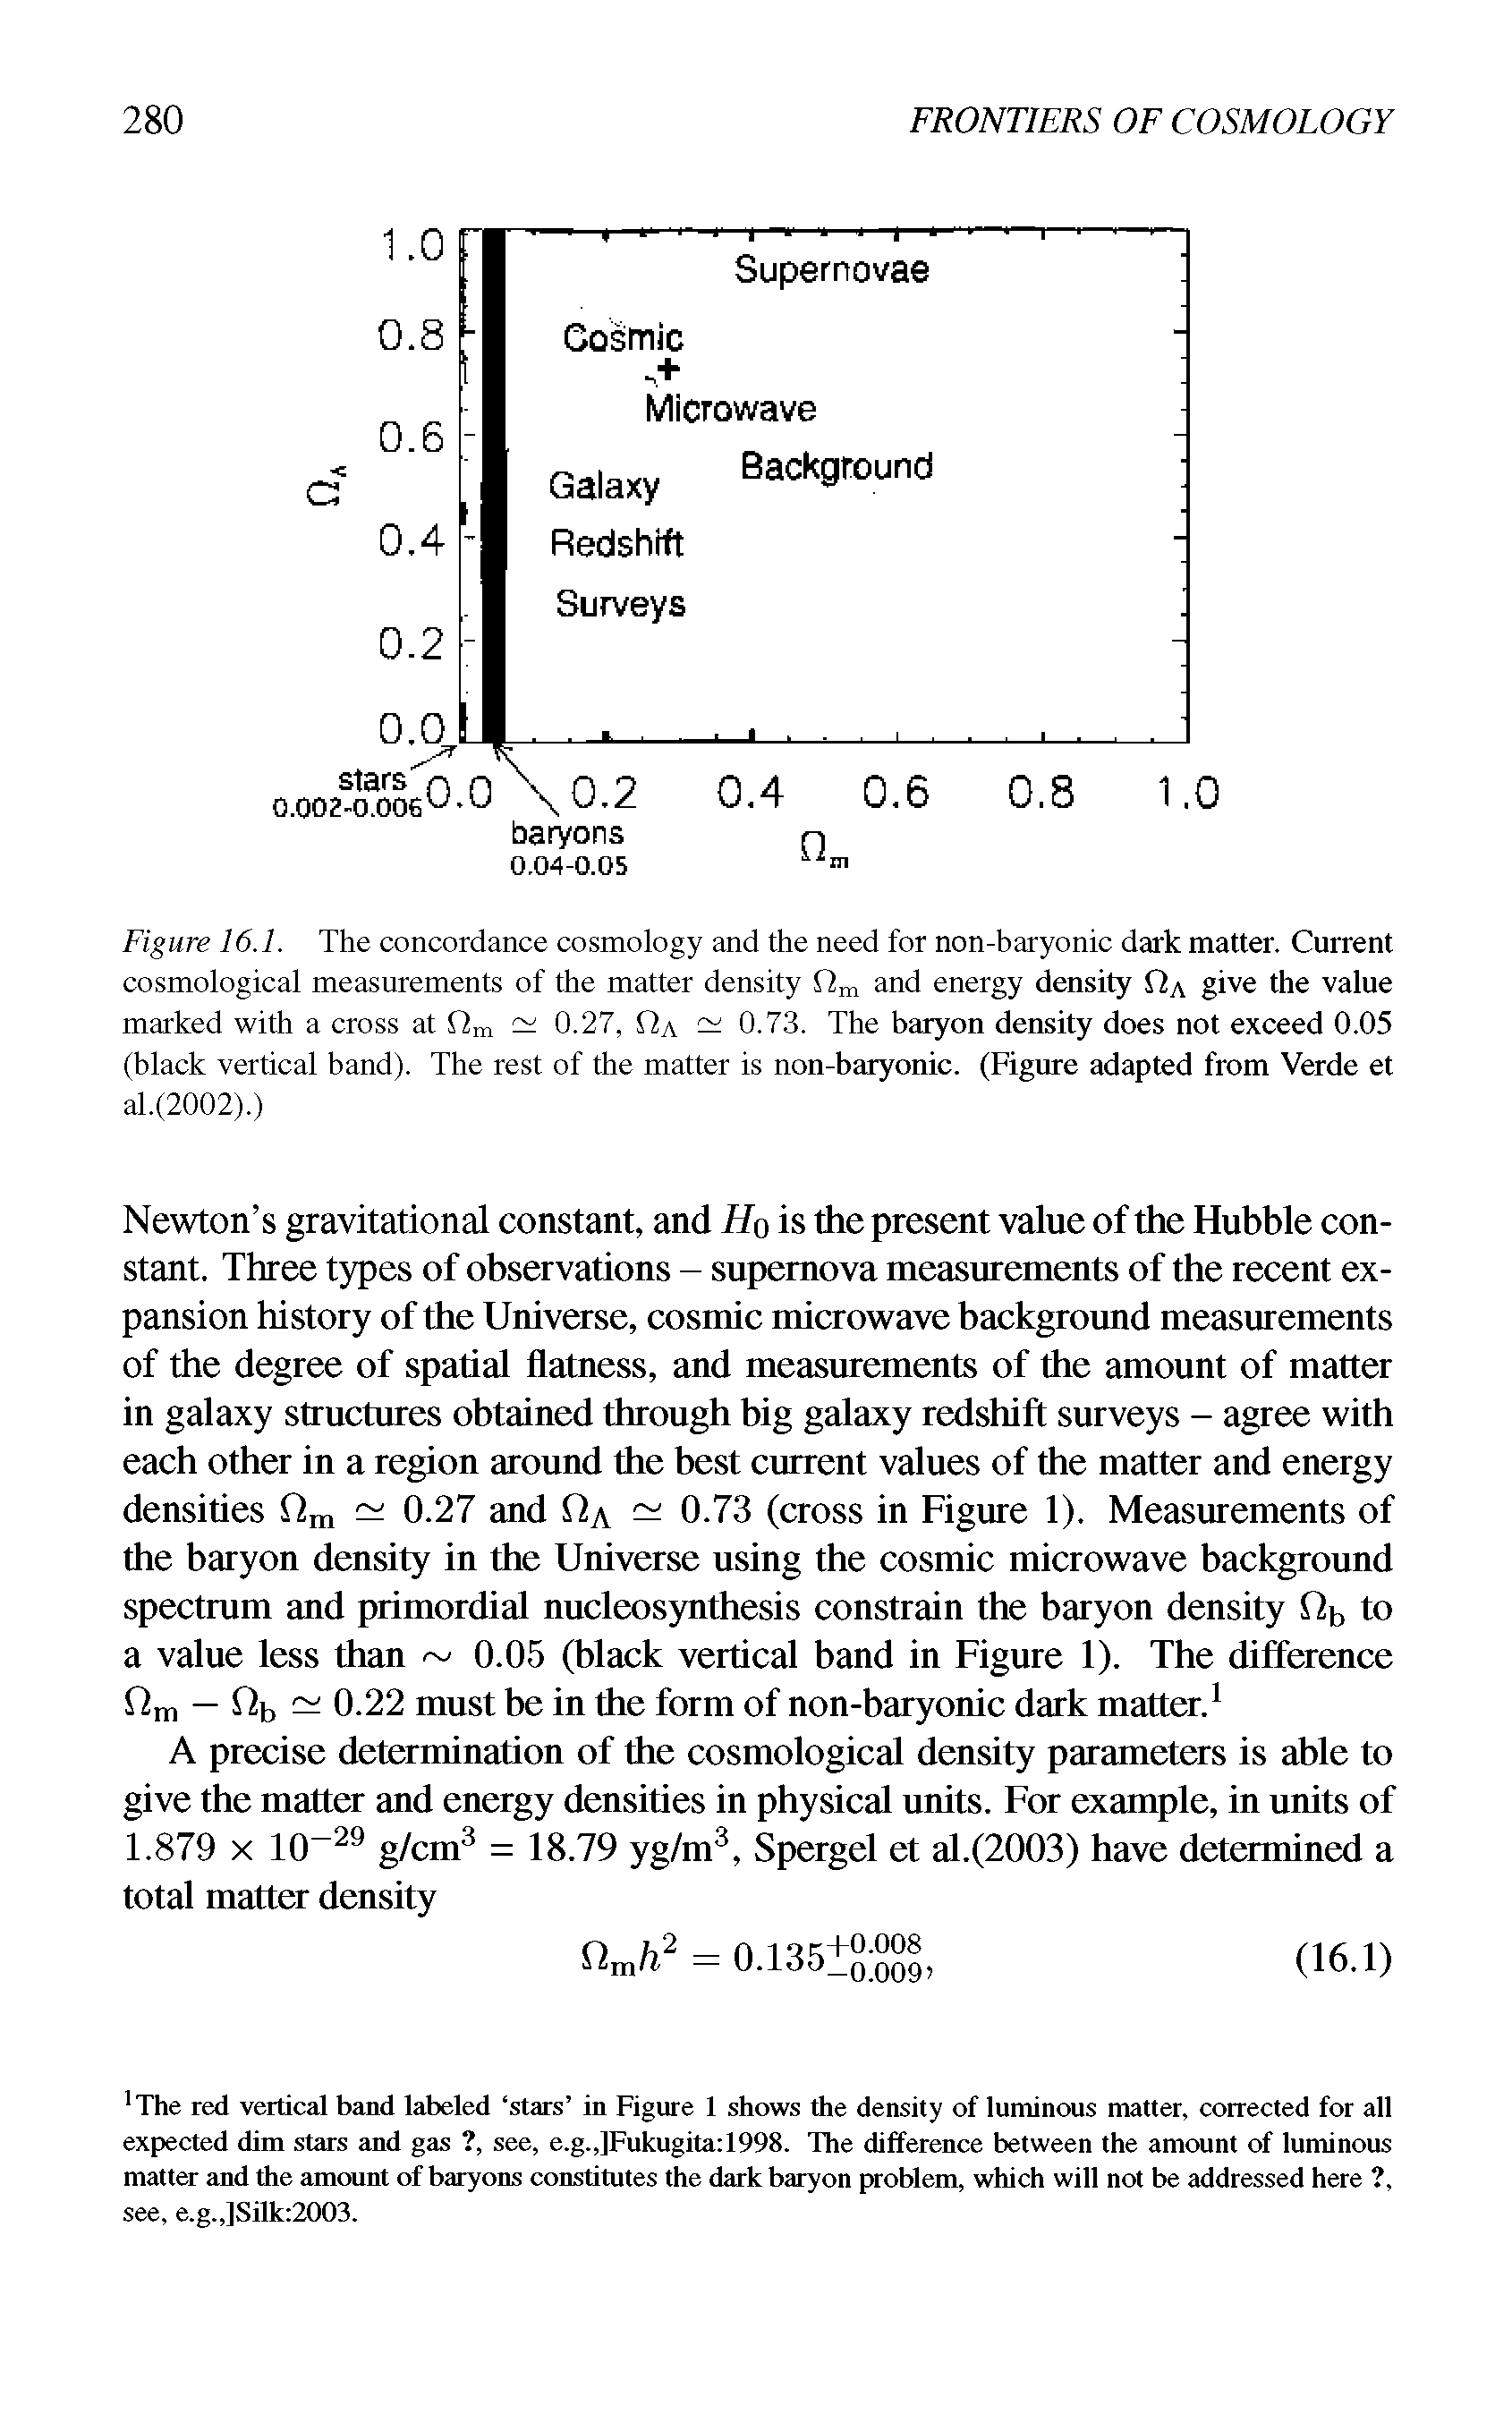 Figure 16.1. The concordance cosmology and the need for non-baryonic dark matter. Current cosmological measurements of the matter density fim and energy density Qa give the value marked with a cross at fim 0.27, Qa — 0.73. The baryon density does not exceed 0.05 (black vertical band). The rest of the matter is non-baryonic. (Figure adapted from Verde et al.(2002).)...